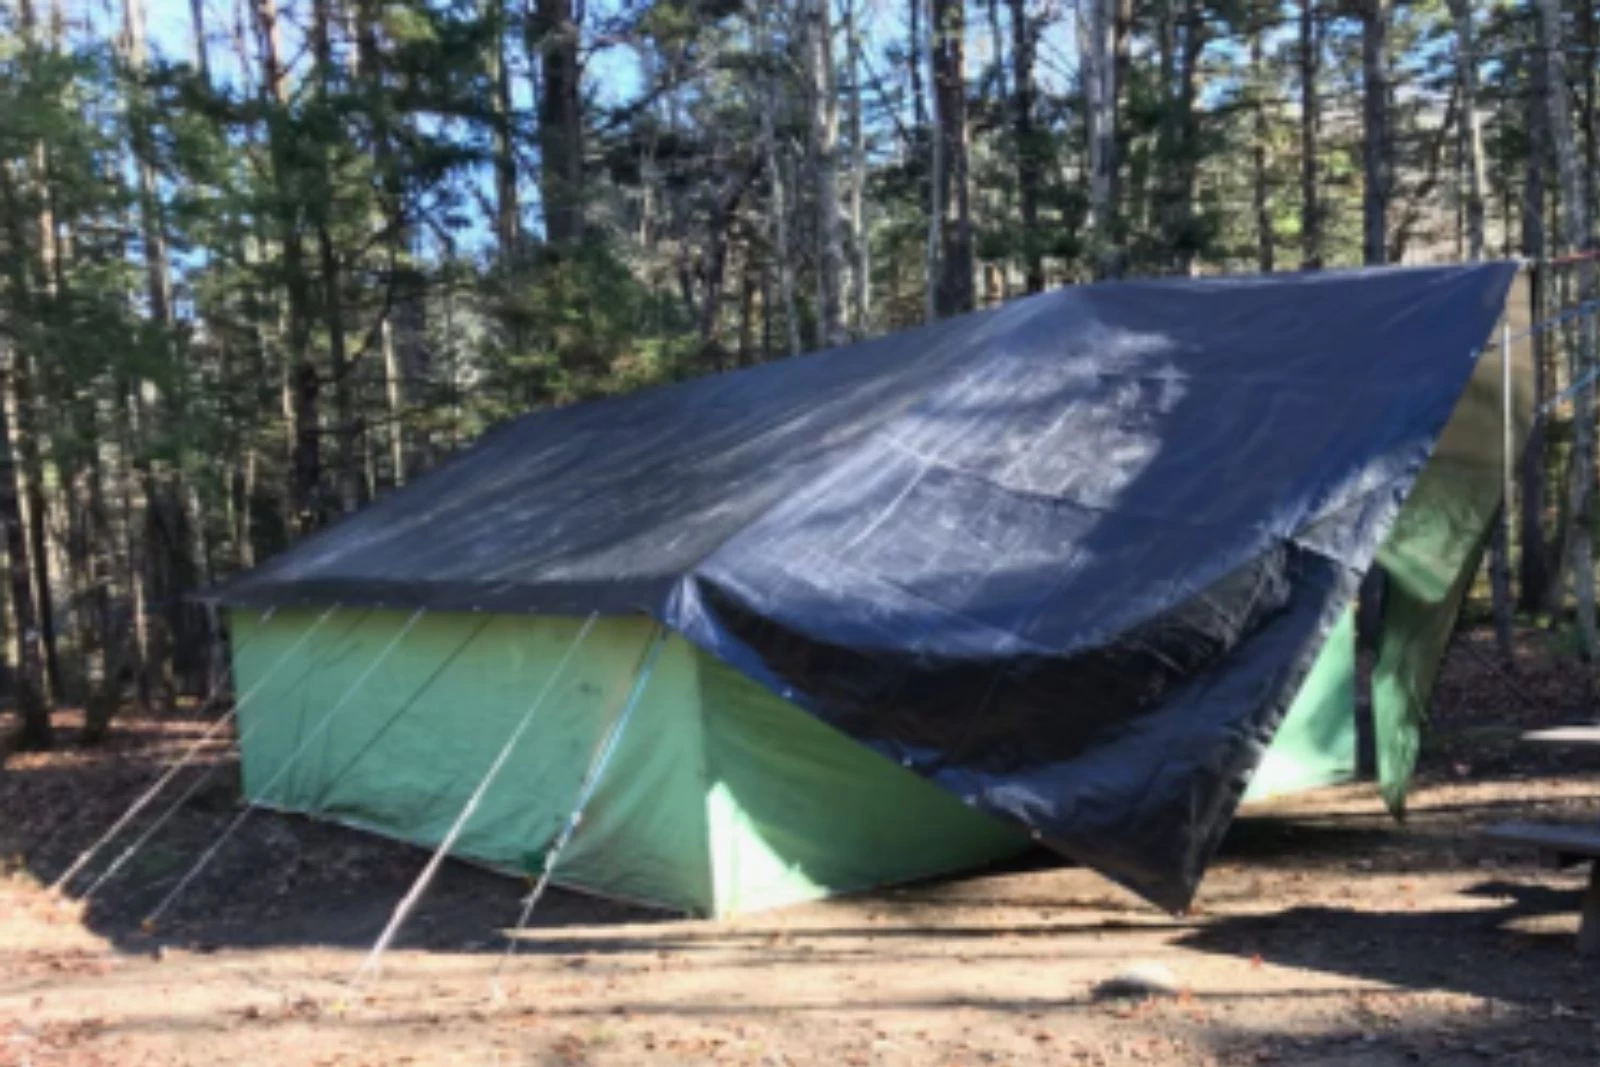 hunter's tent goes missing in new york